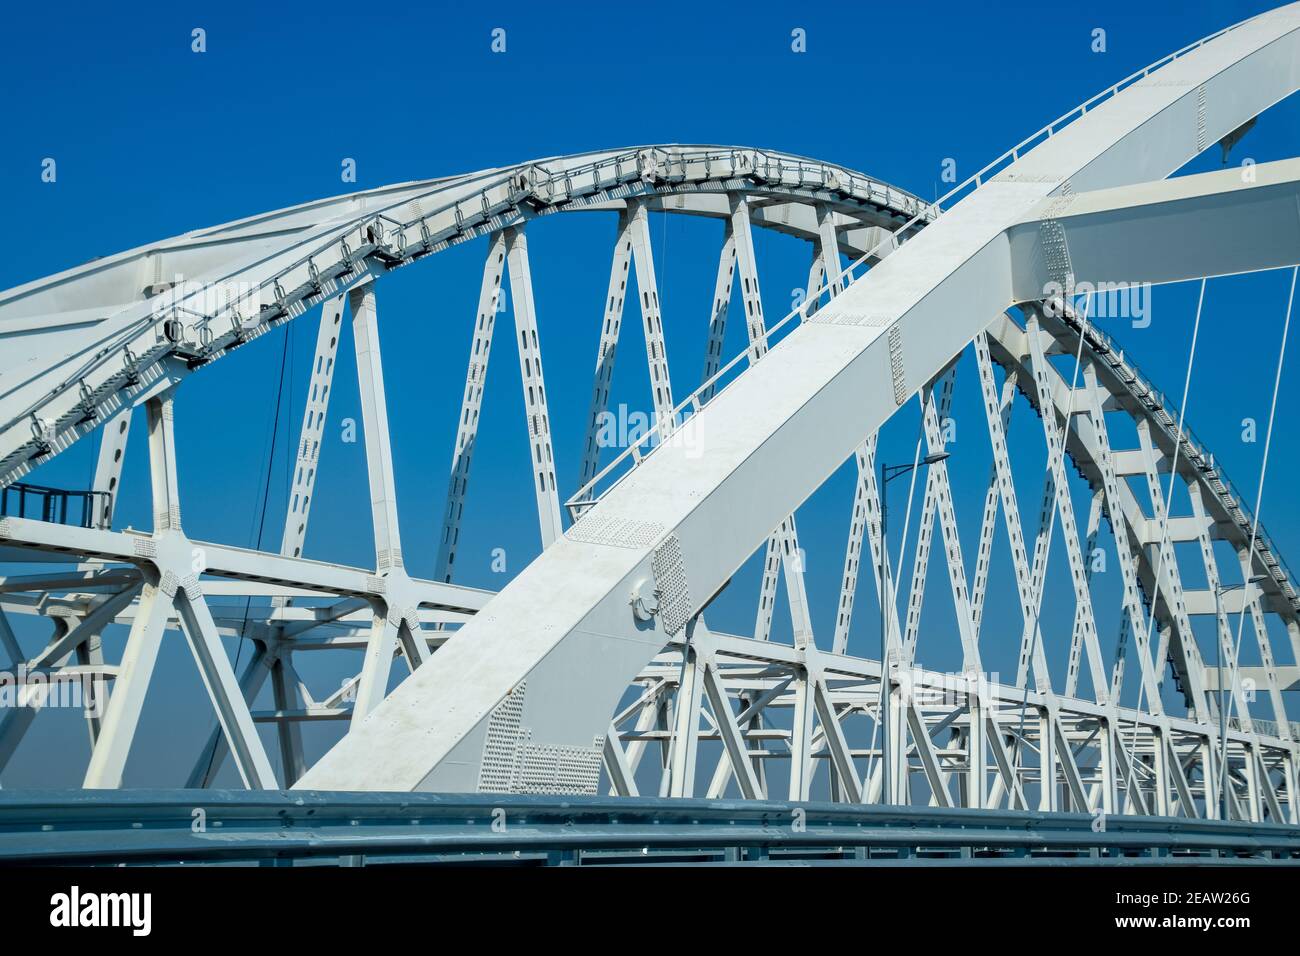 The navigable arch of the Crimean bridge. Arch of the highway and railway section of the Crimean bridge. Stock Photo